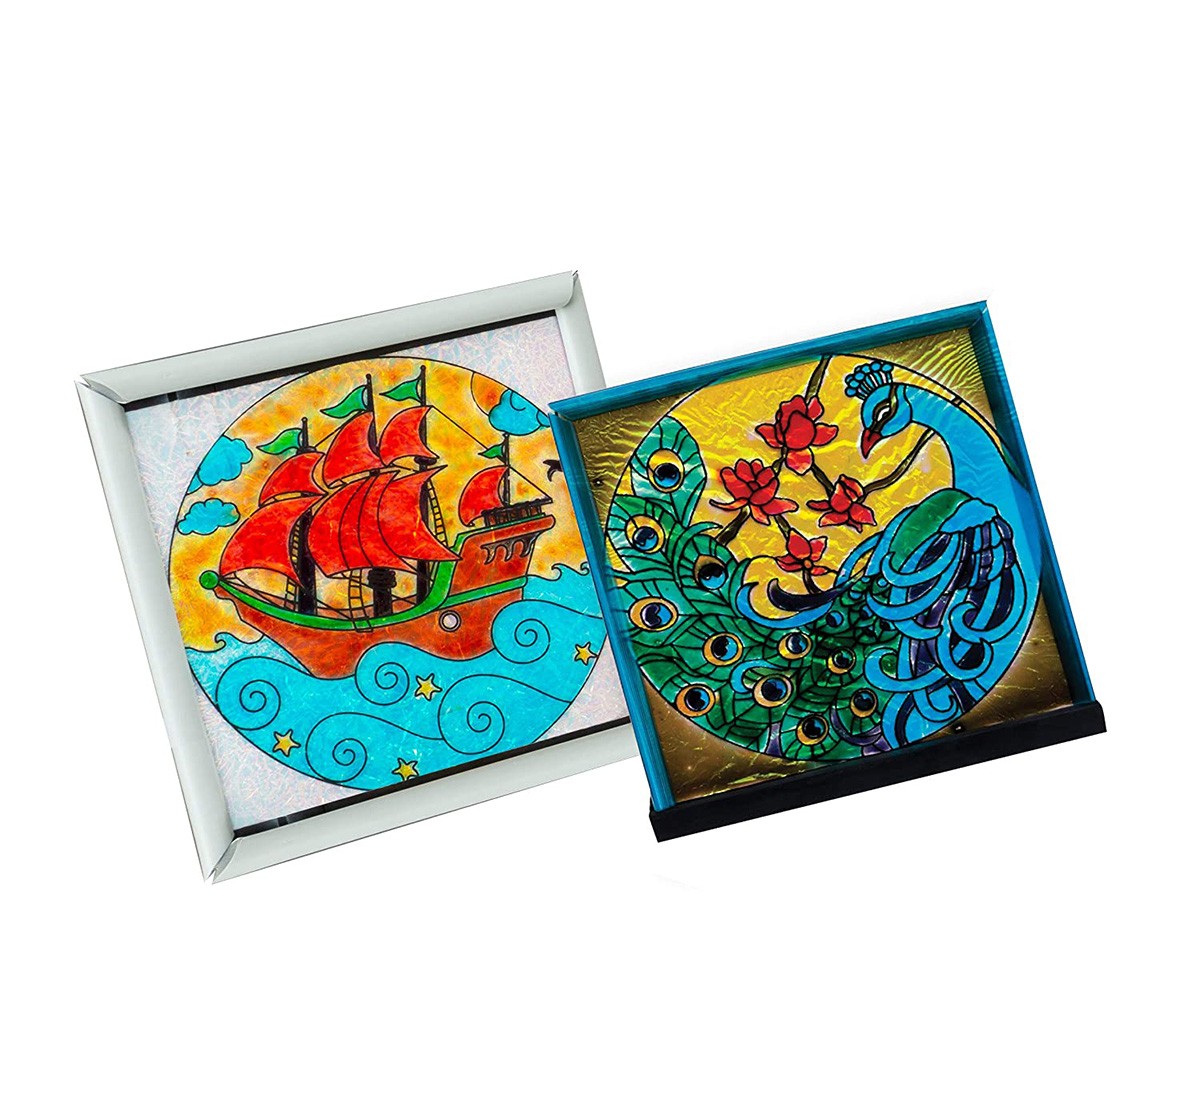 Handycraft Glass Painting - 2013 (Multicolor)